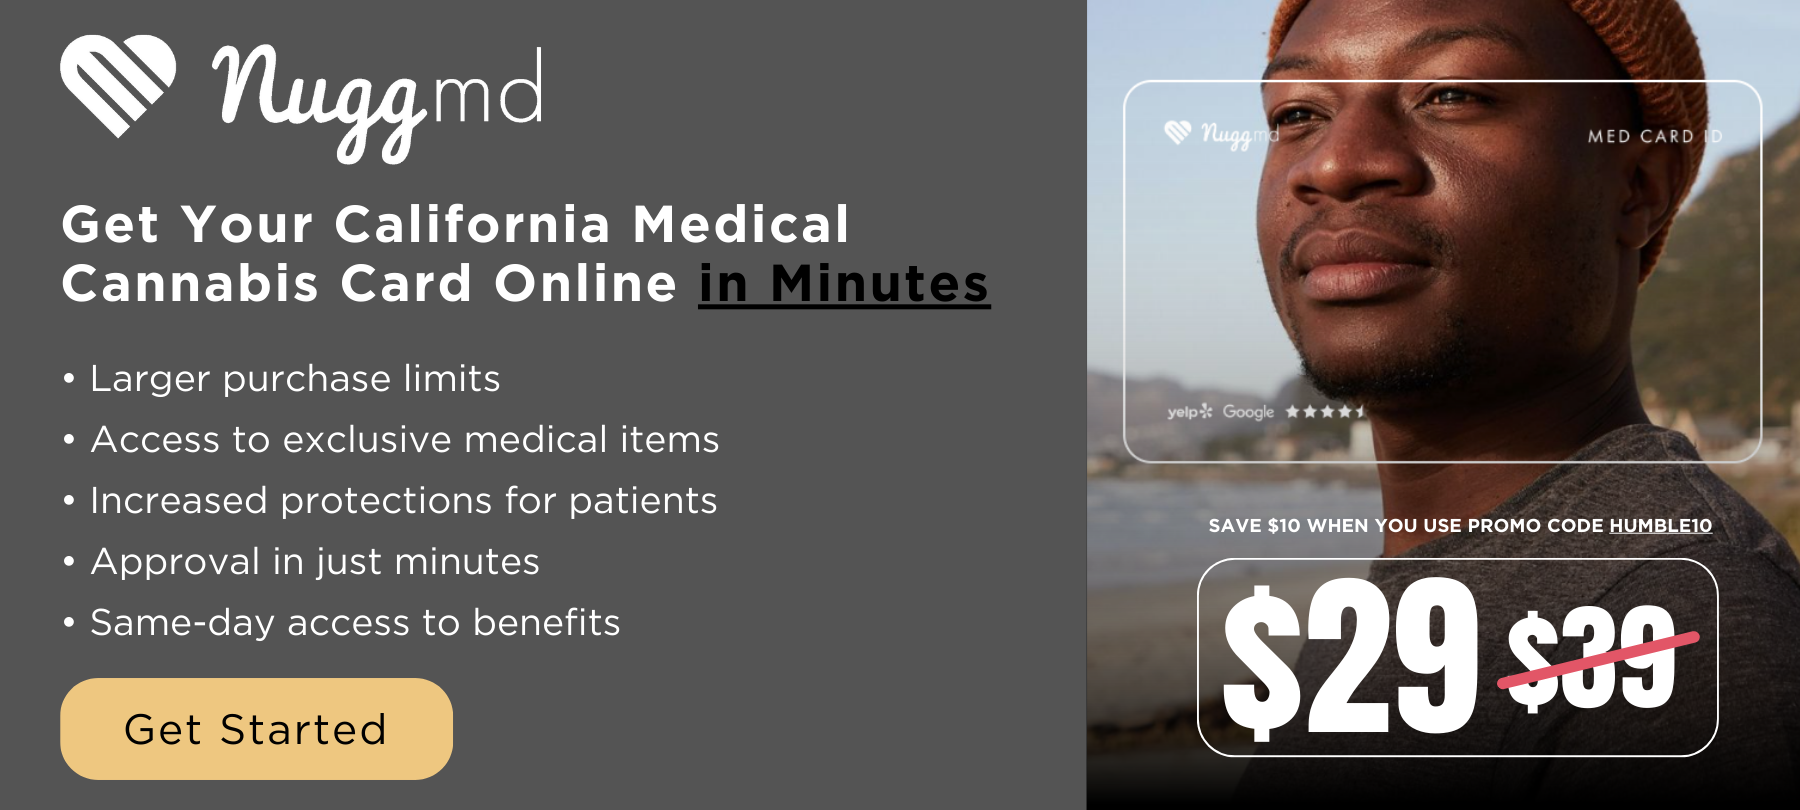 Get Your California Medical Cannabis Card Online in Minutes